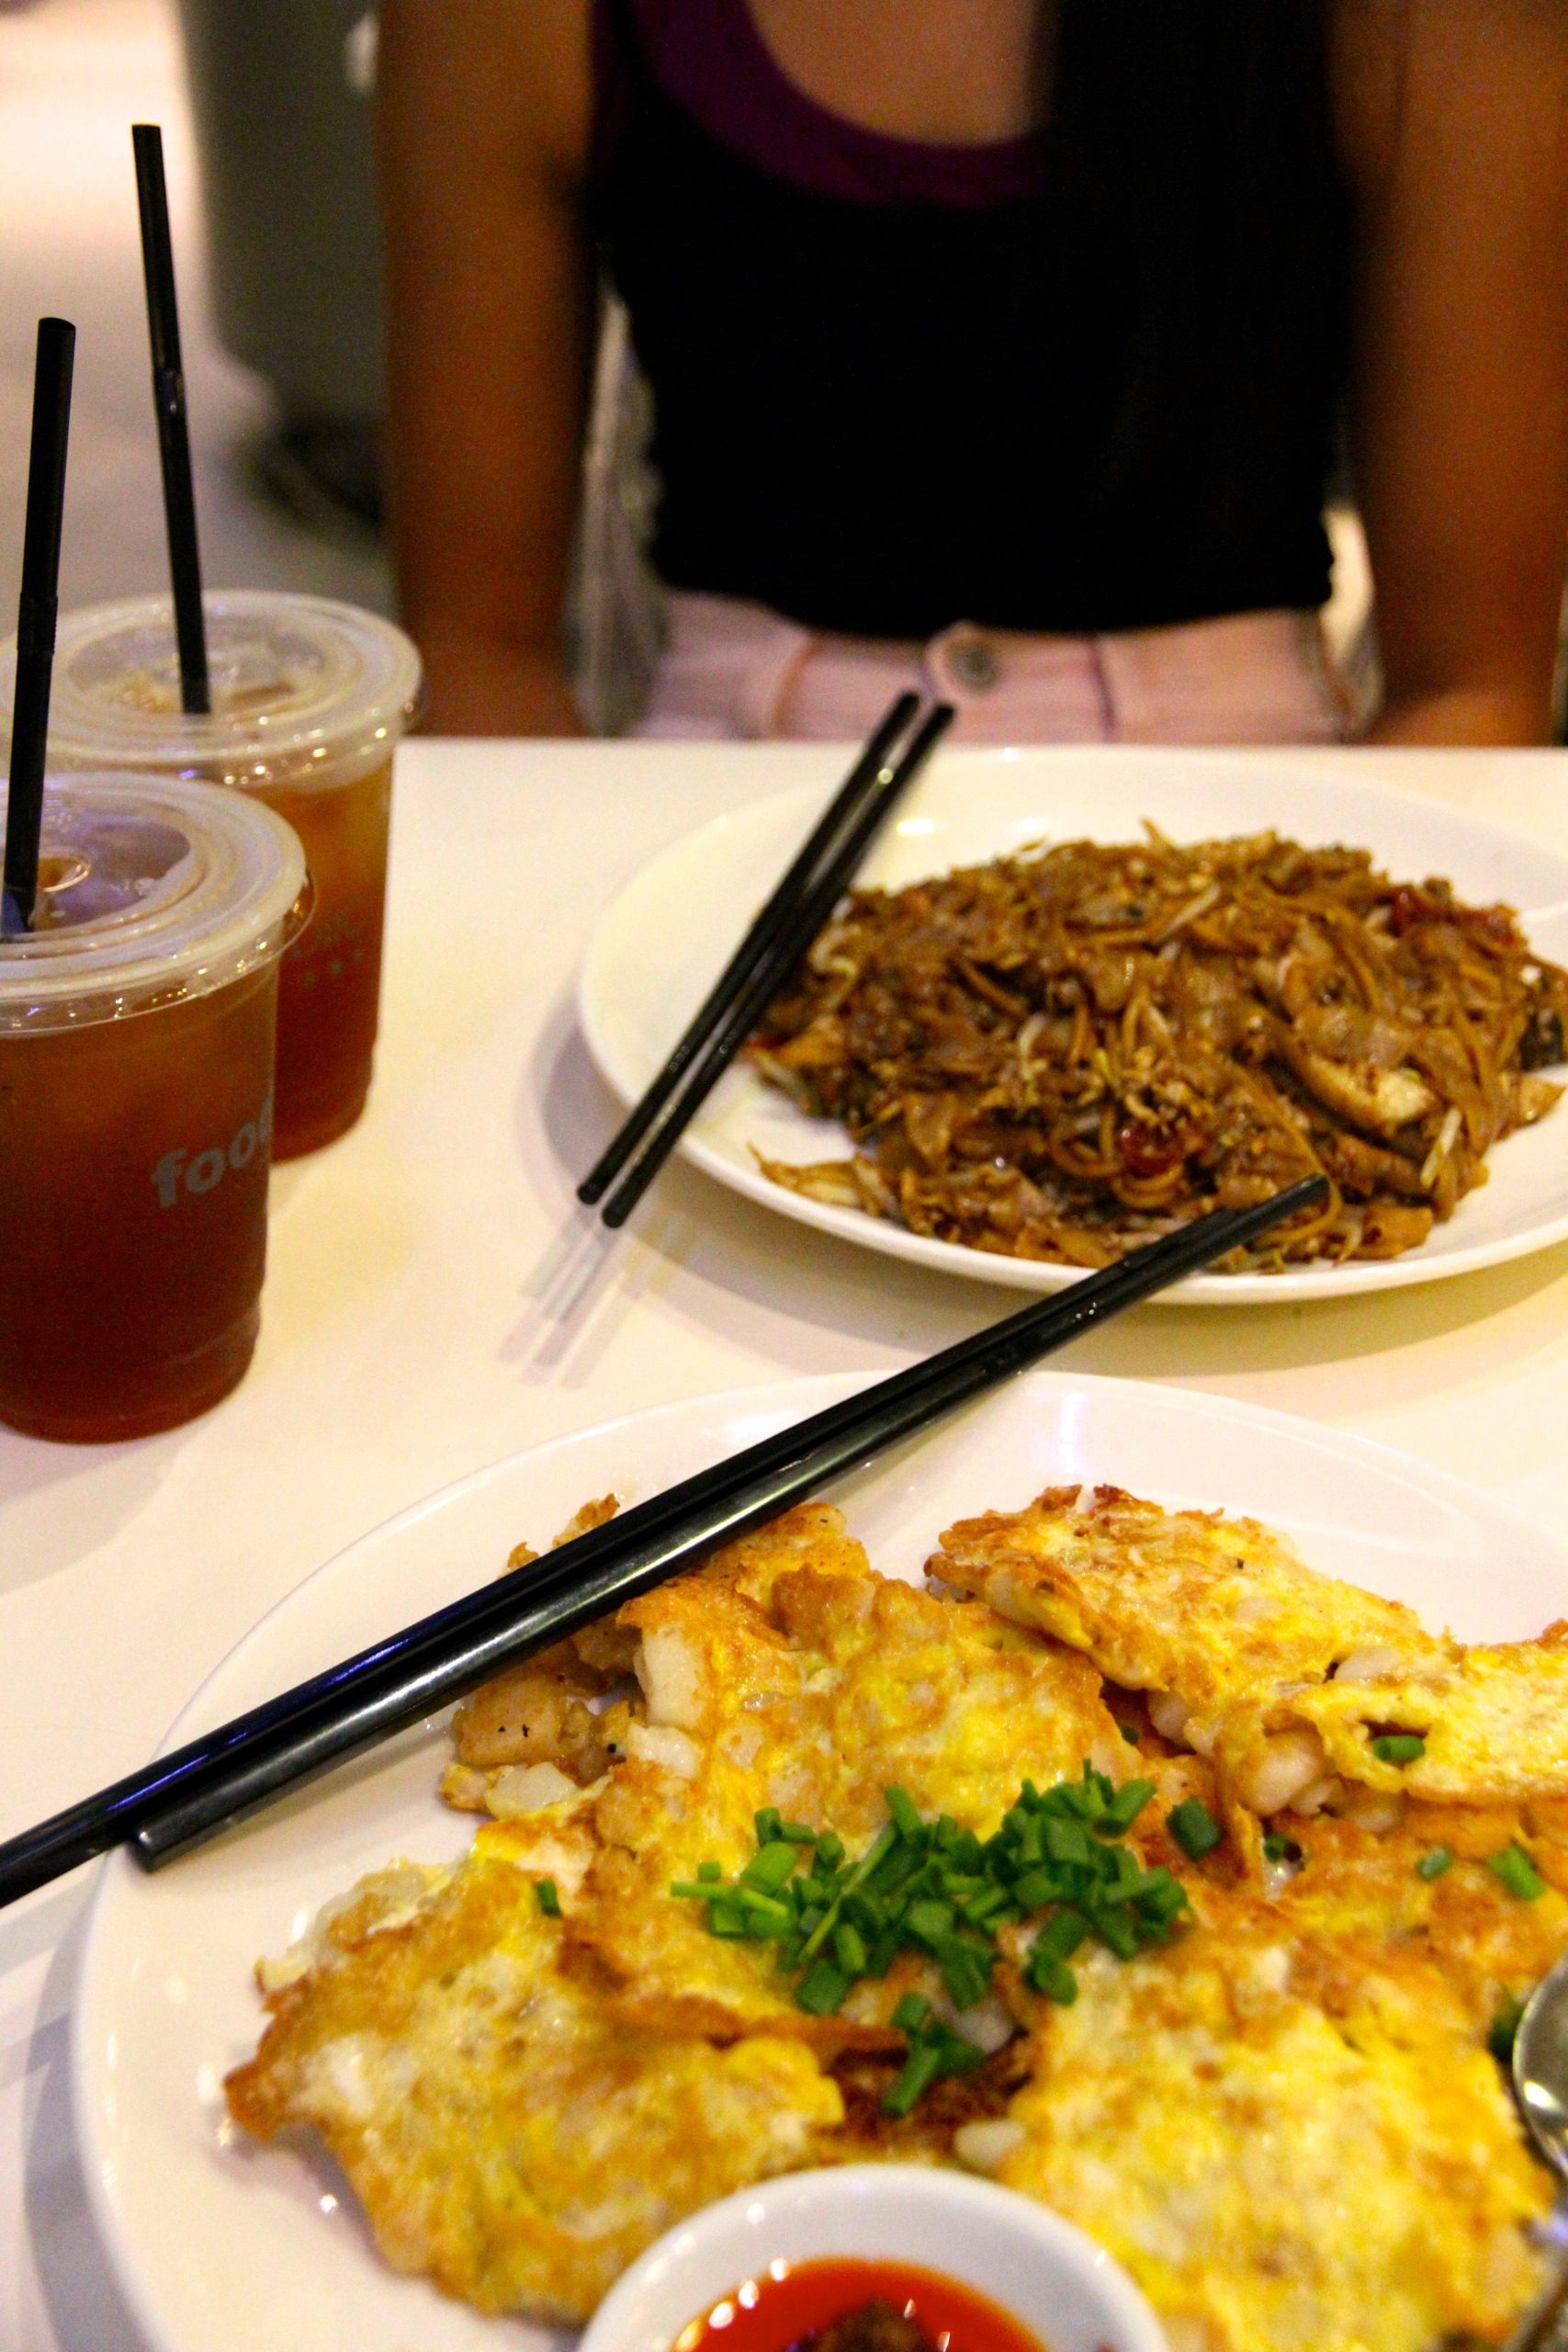 Fried carrot cake in the foreground and Char Kway Teow in the background